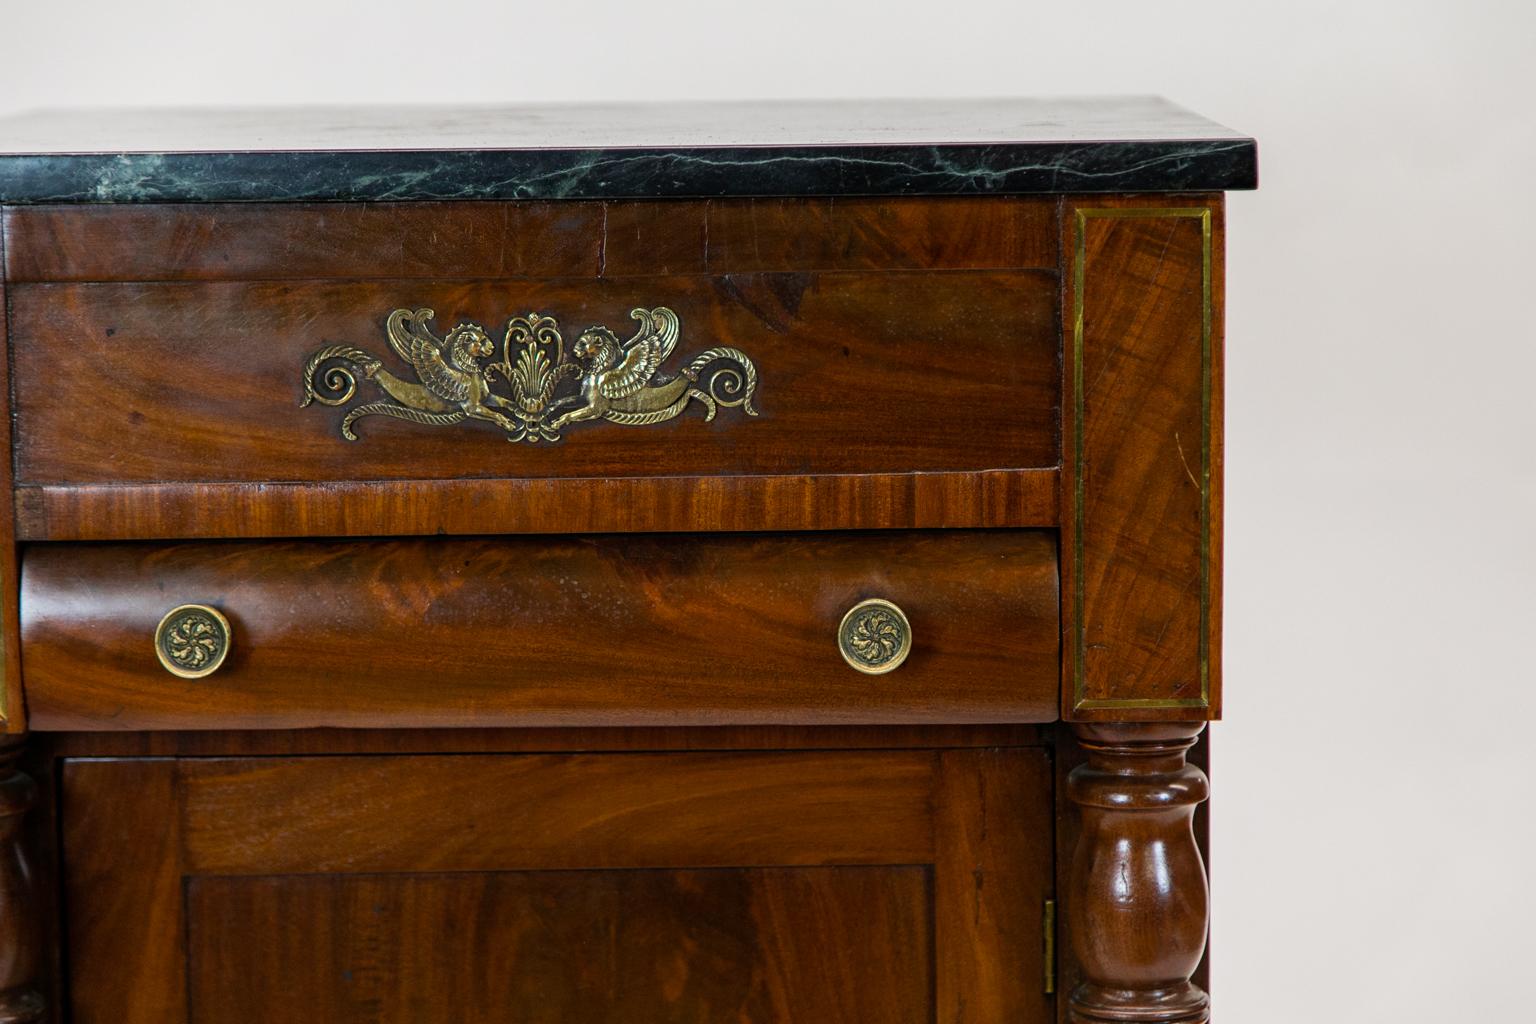 The top of this American Empire console cabinet has a dark green marble(later). The marble can be moved aside to reveal a hidden compartment behind the frieze. The sides have recessed panels.
 